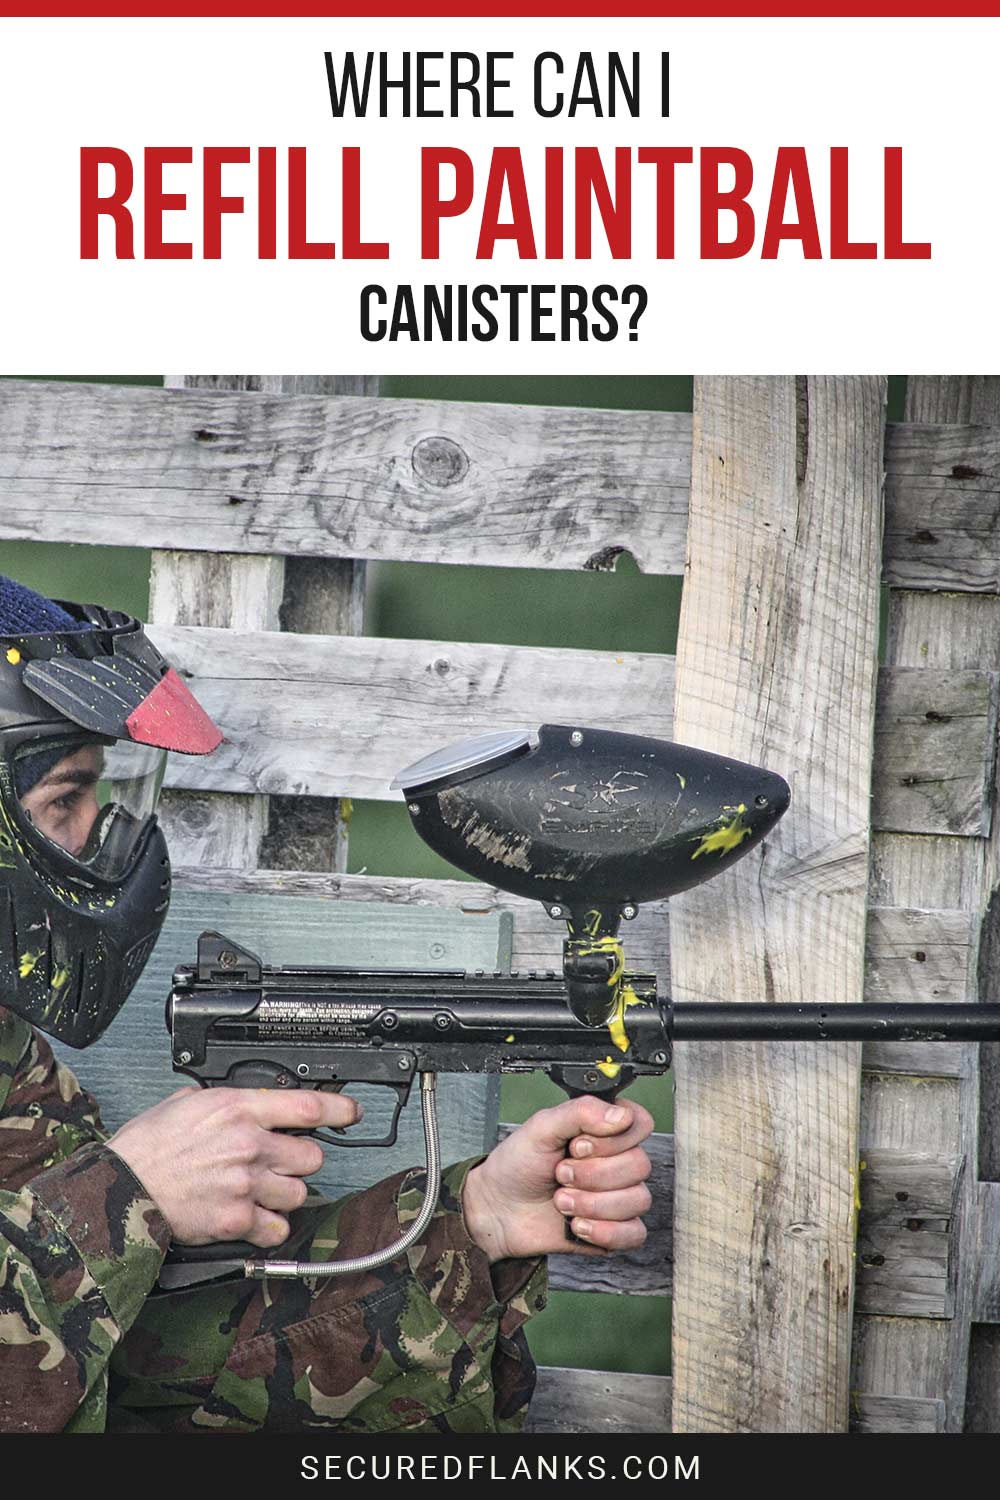 Person with a paintball gun in hands near a wooden fence - Where can I refill paintball canisters?